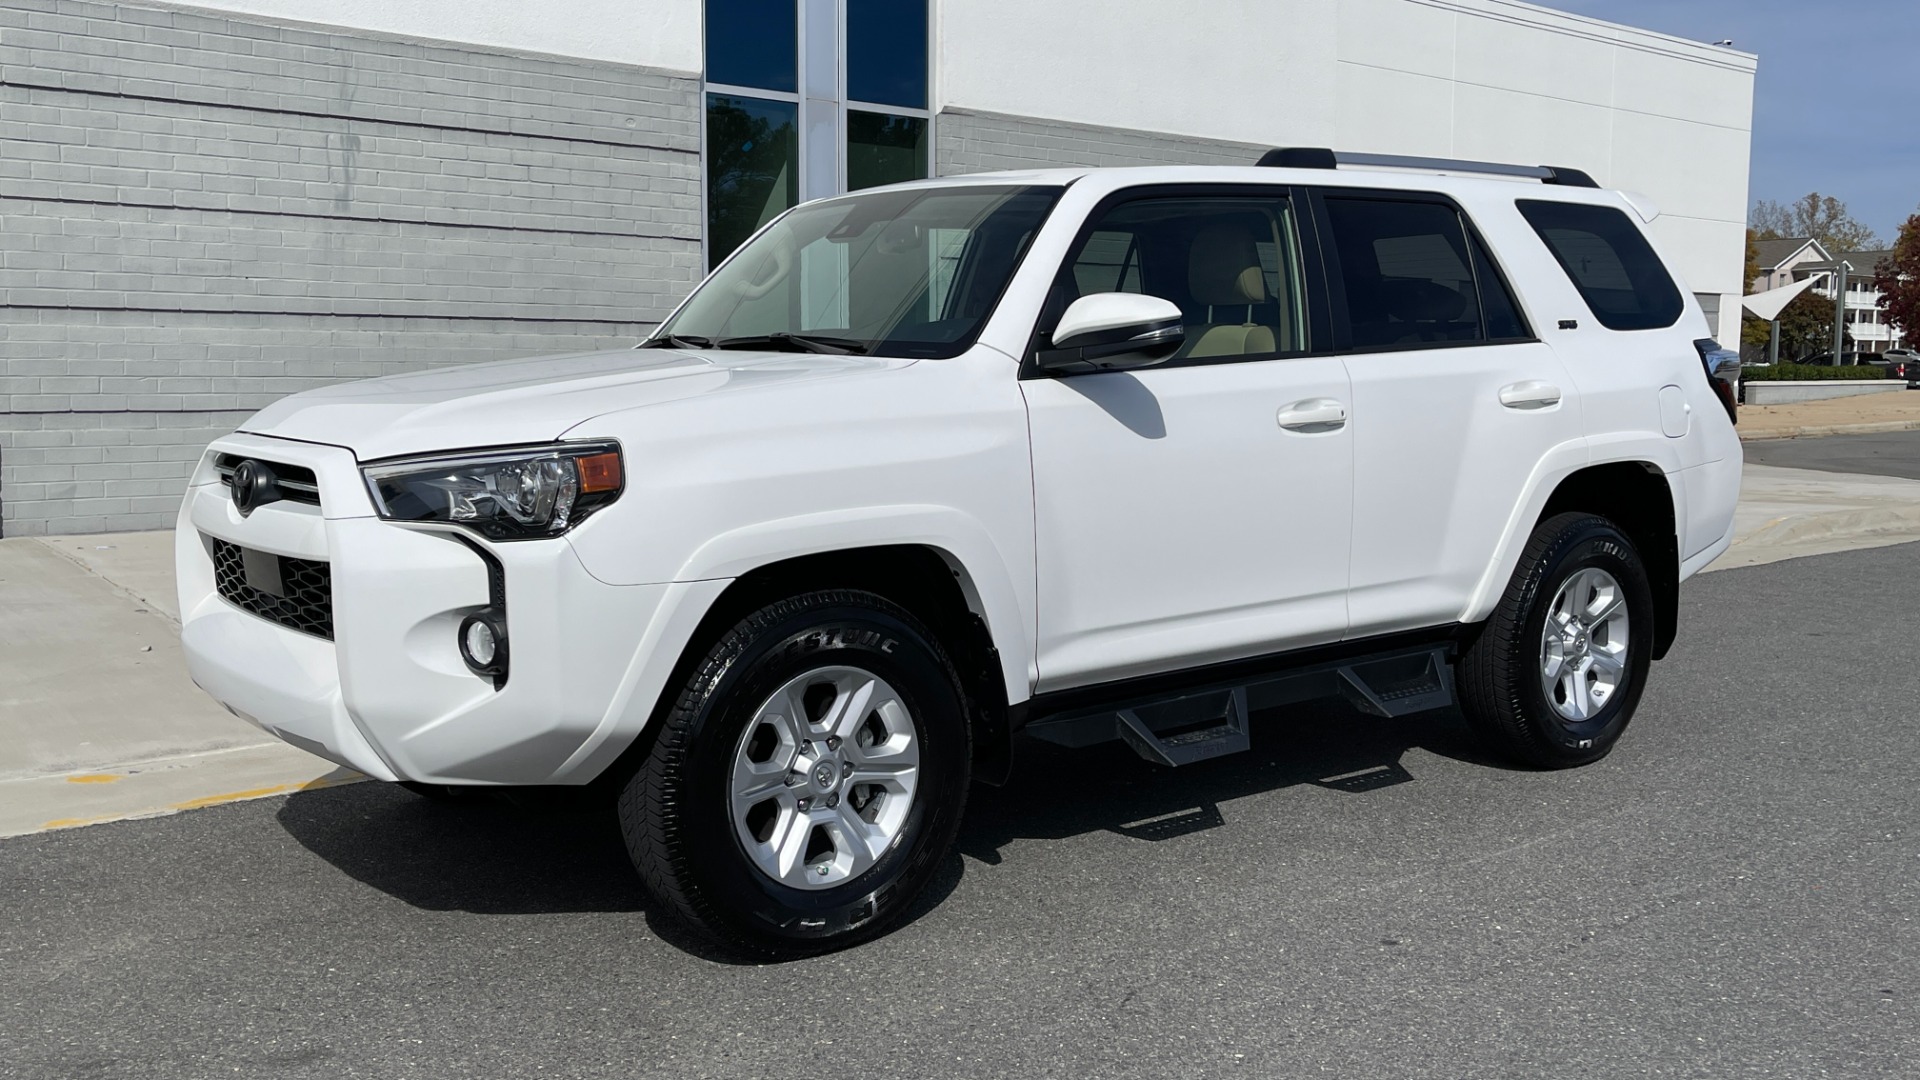 Used 2020 Toyota 4Runner SR5 PREMIUM / 4X4 / LEATHER / SUNROOF / LED INTERIOR for sale $40,995 at Formula Imports in Charlotte NC 28227 5